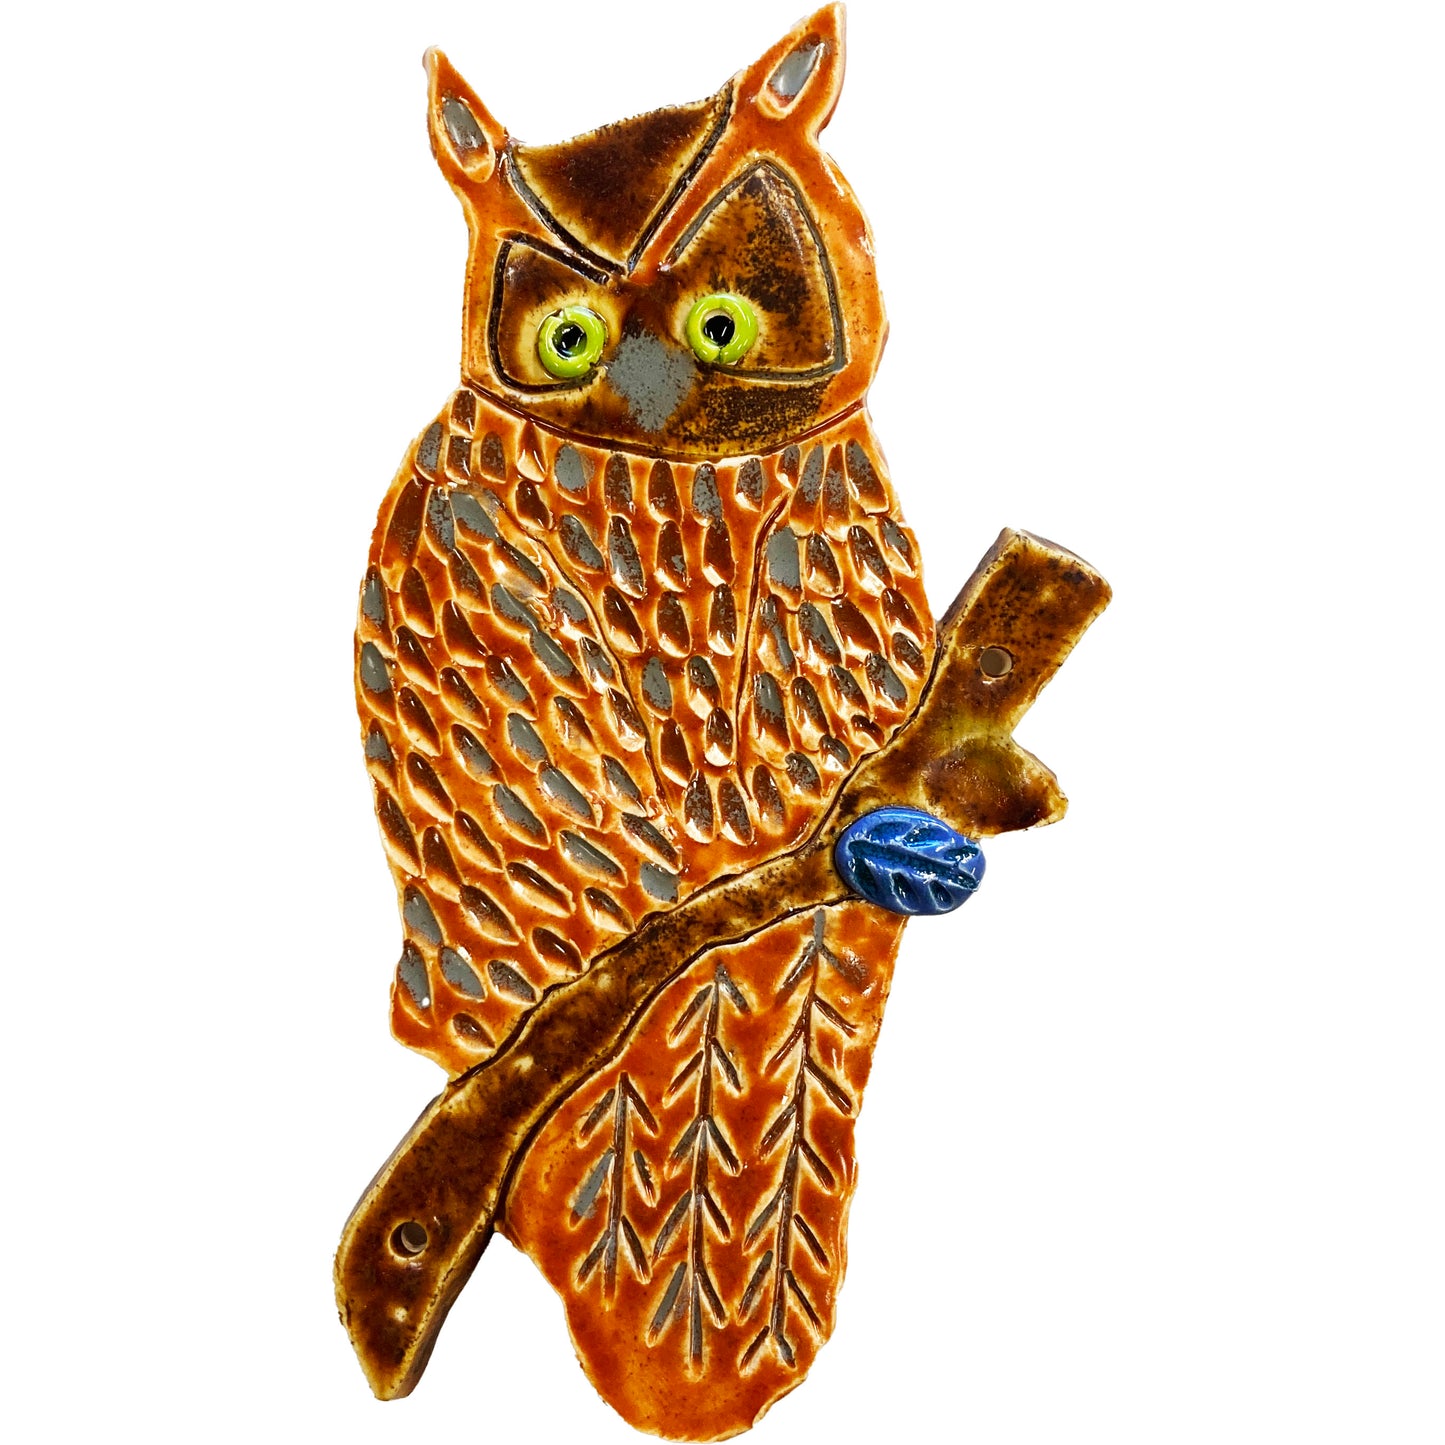 WATCH Resources Art Guild - Ceramic Arts Handmade Clay Crafts 8-inch x 5-inch Glazed Owl made by Lisa Uptain